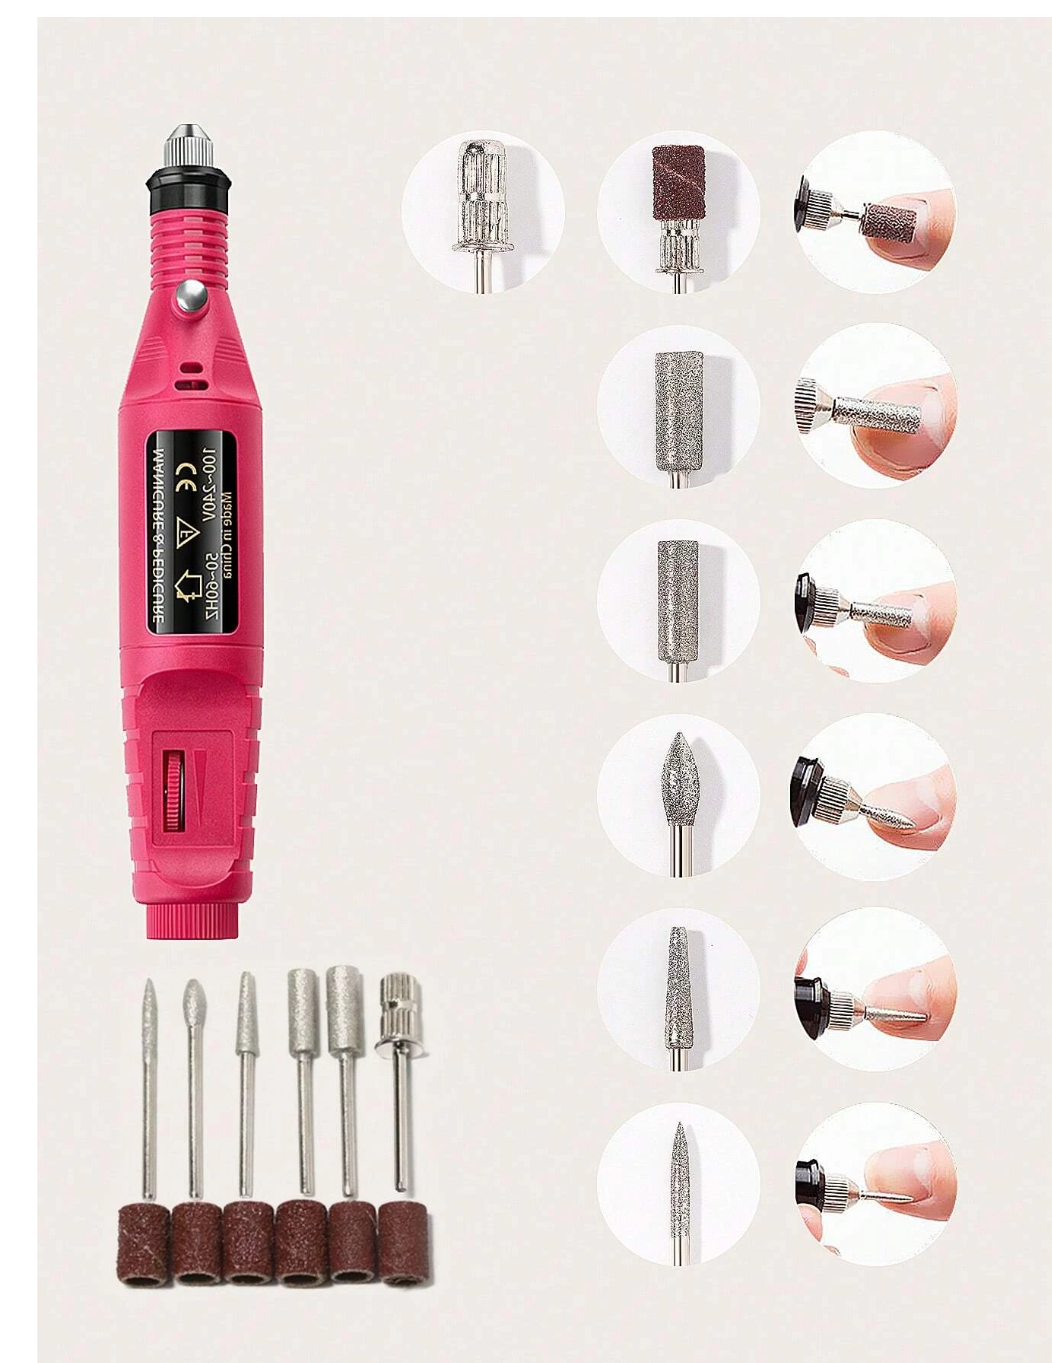 Radiant Nails Kit: 13pcs UV LED Light, Nail Drill Machine, and More - Ultimate Manicure Tools for DIY Glam at Home!